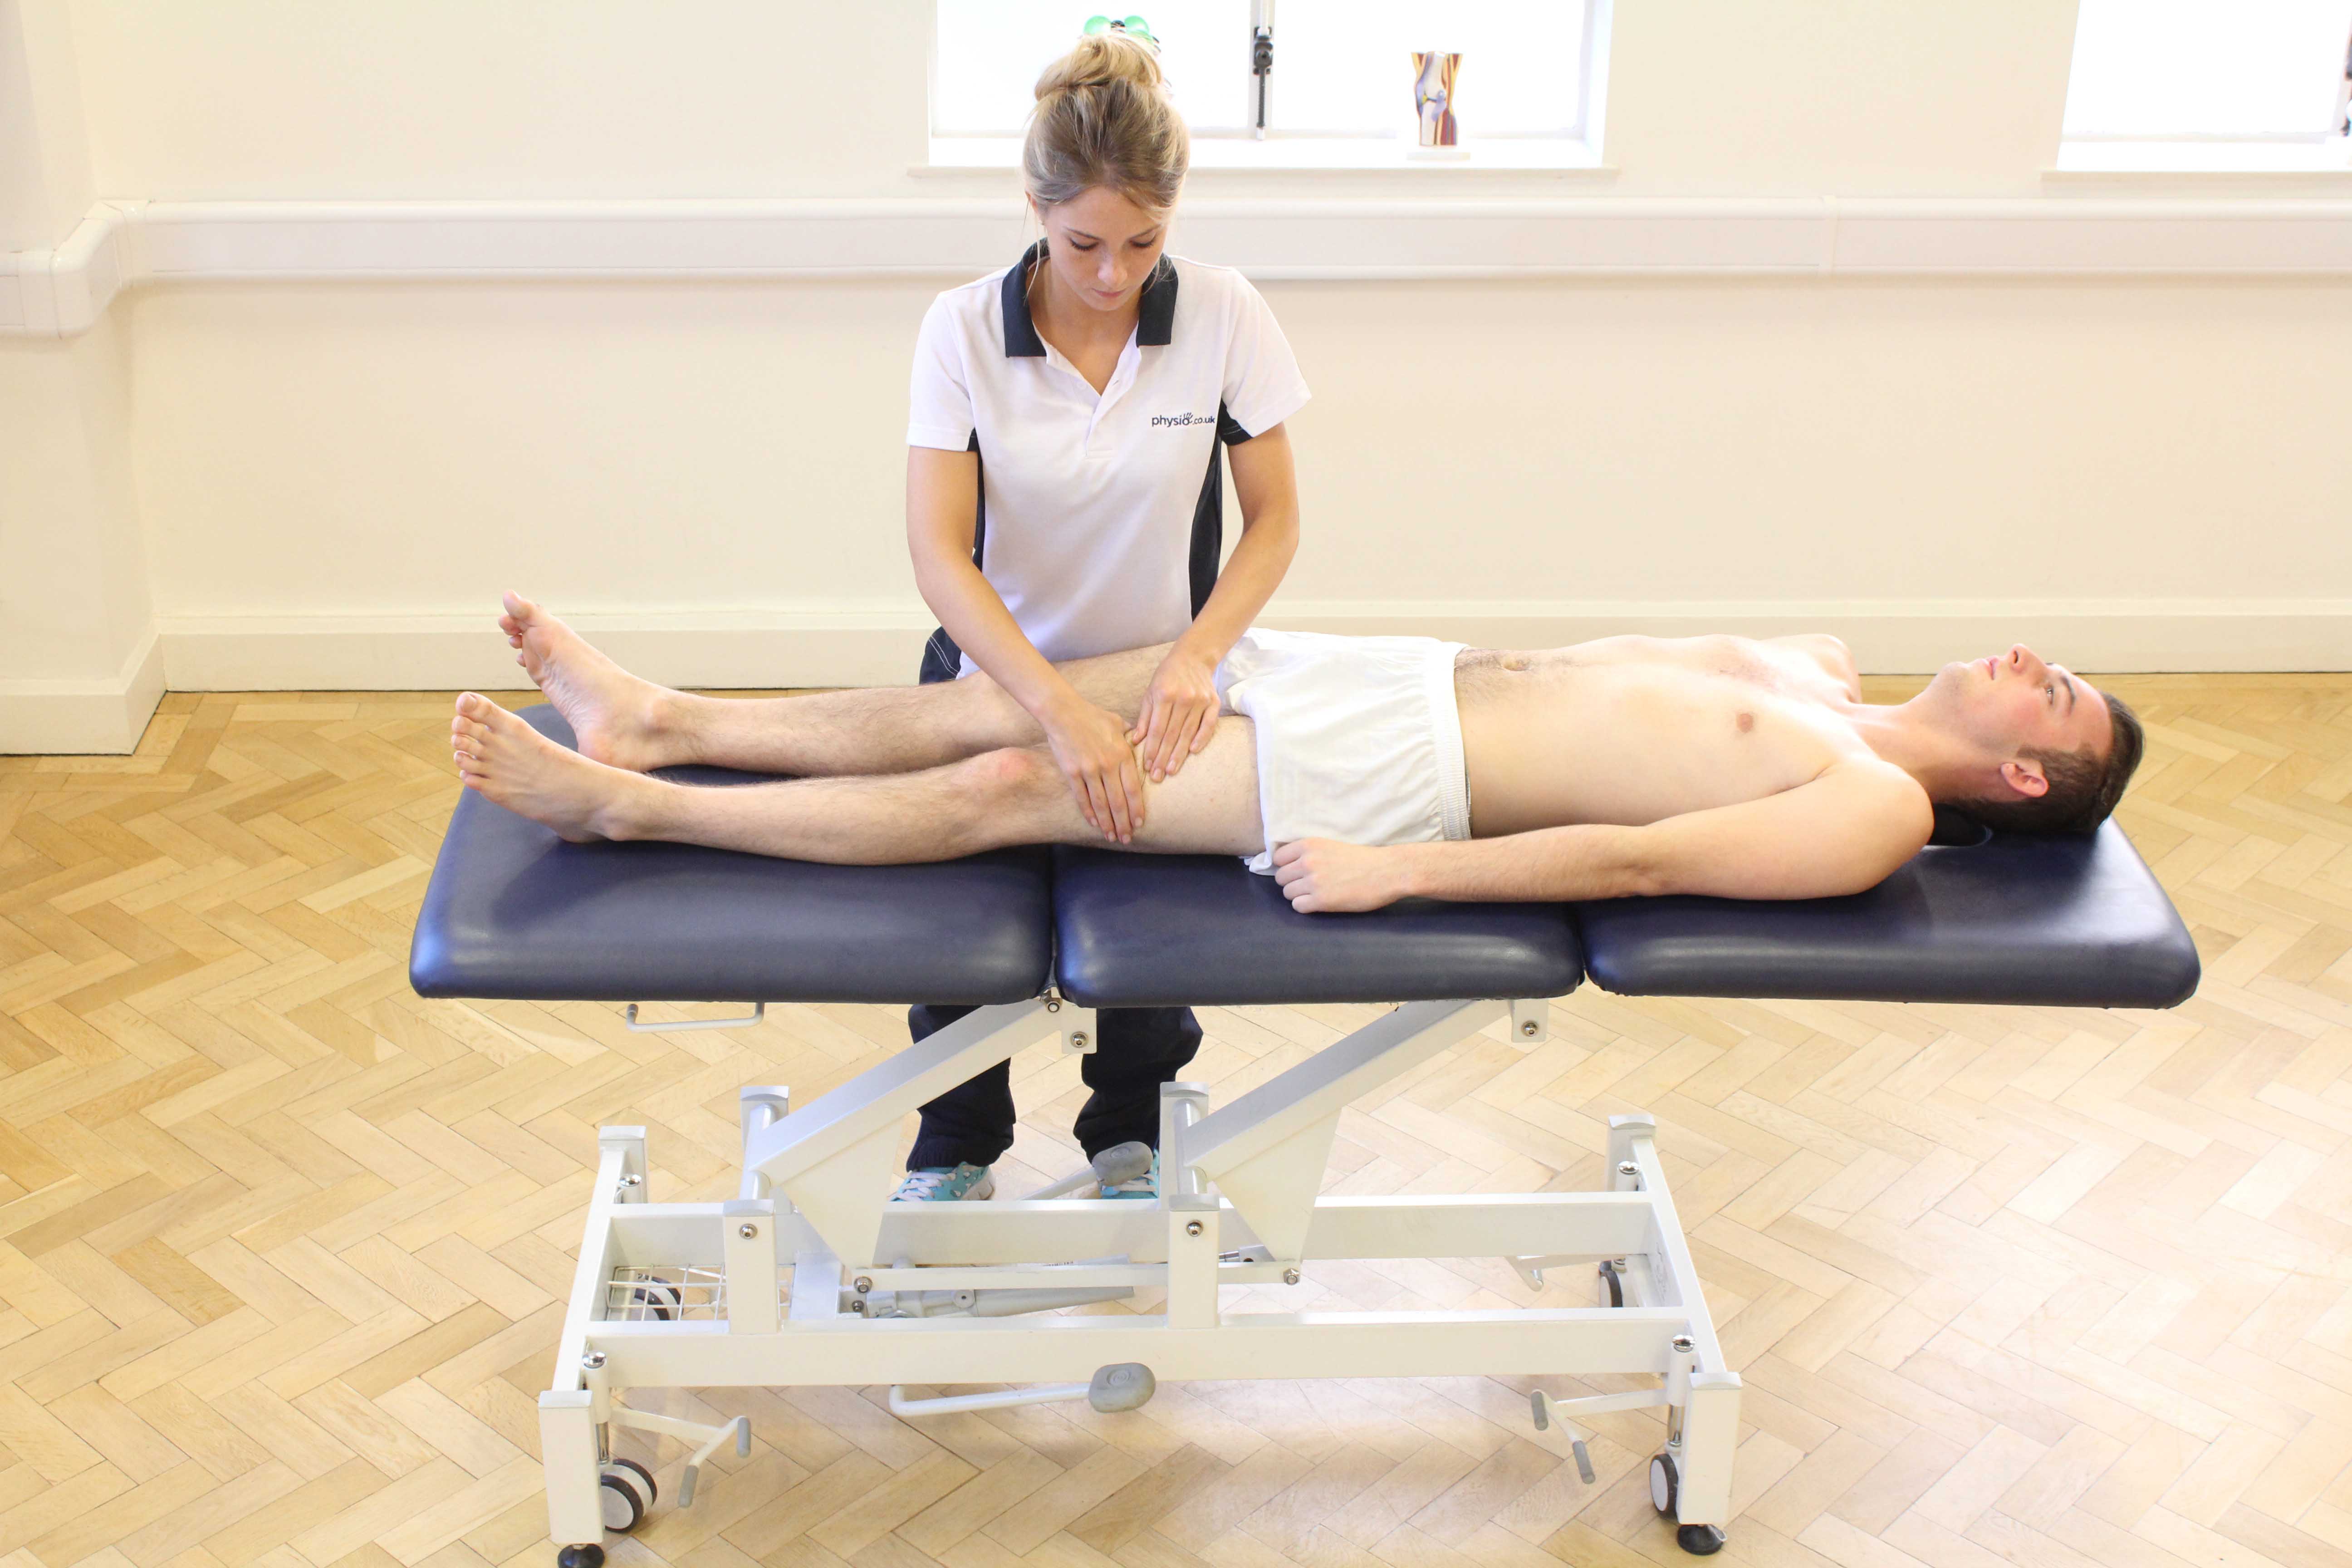 Rolling soft tissue massage of the quadriceps muscles by a specialist MSK therapist